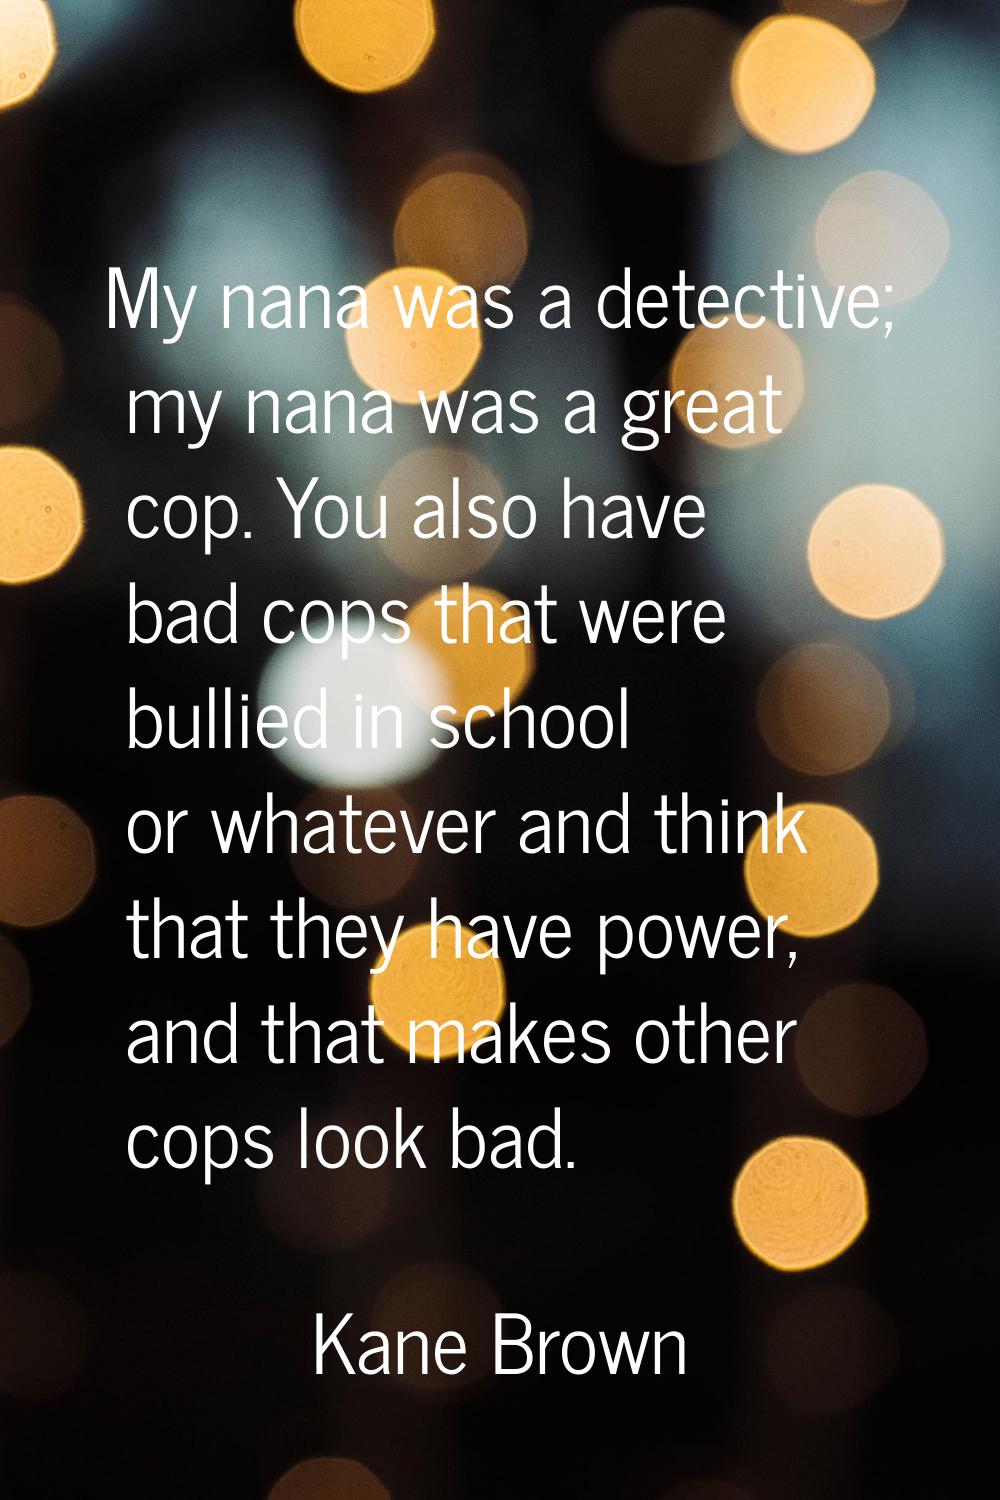 My nana was a detective; my nana was a great cop. You also have bad cops that were bullied in schoo